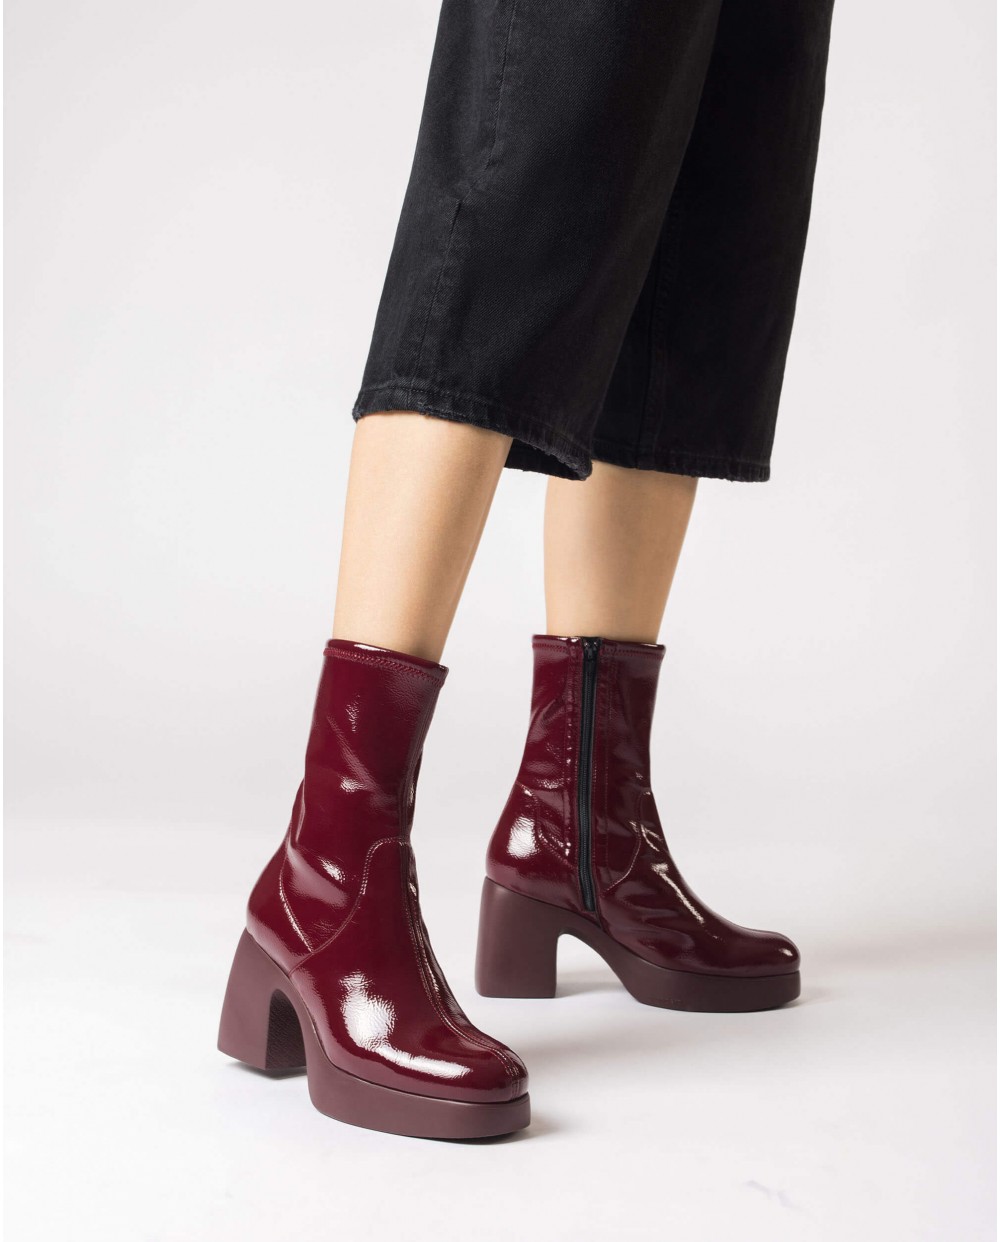 Wonders-Ankle Boots-Burgundy ERIS ankle boot